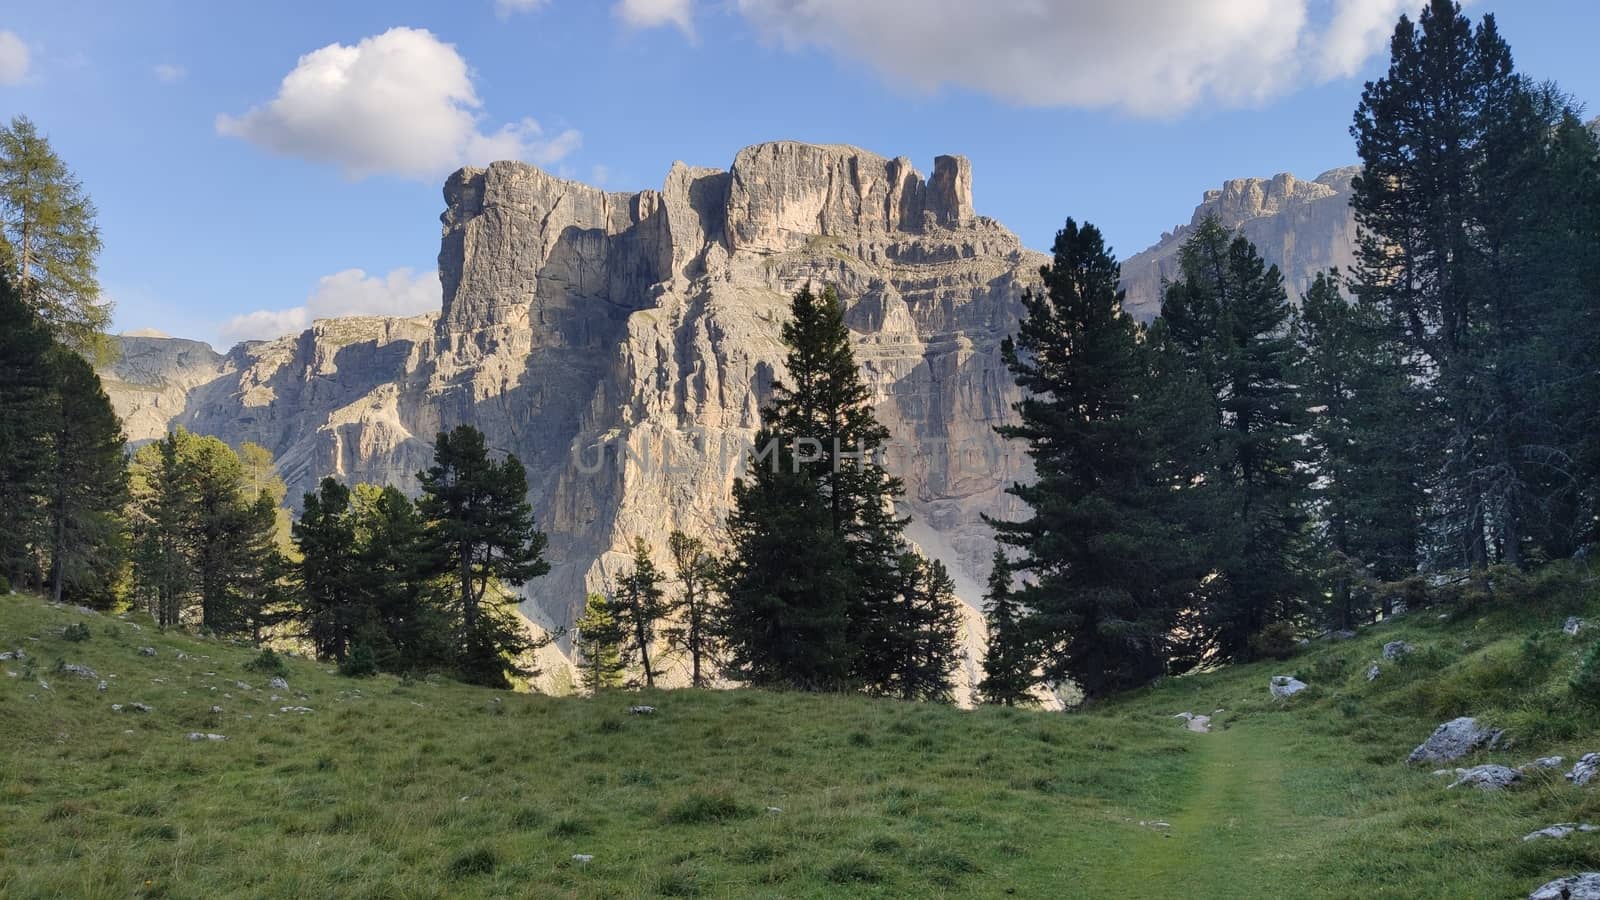 Val Gardena, Italy - 09/15/2020: Scenic alpine place with magical Dolomites mountains in background, amazing clouds and blue sky in Trentino Alto Adige region, Italy, Europe